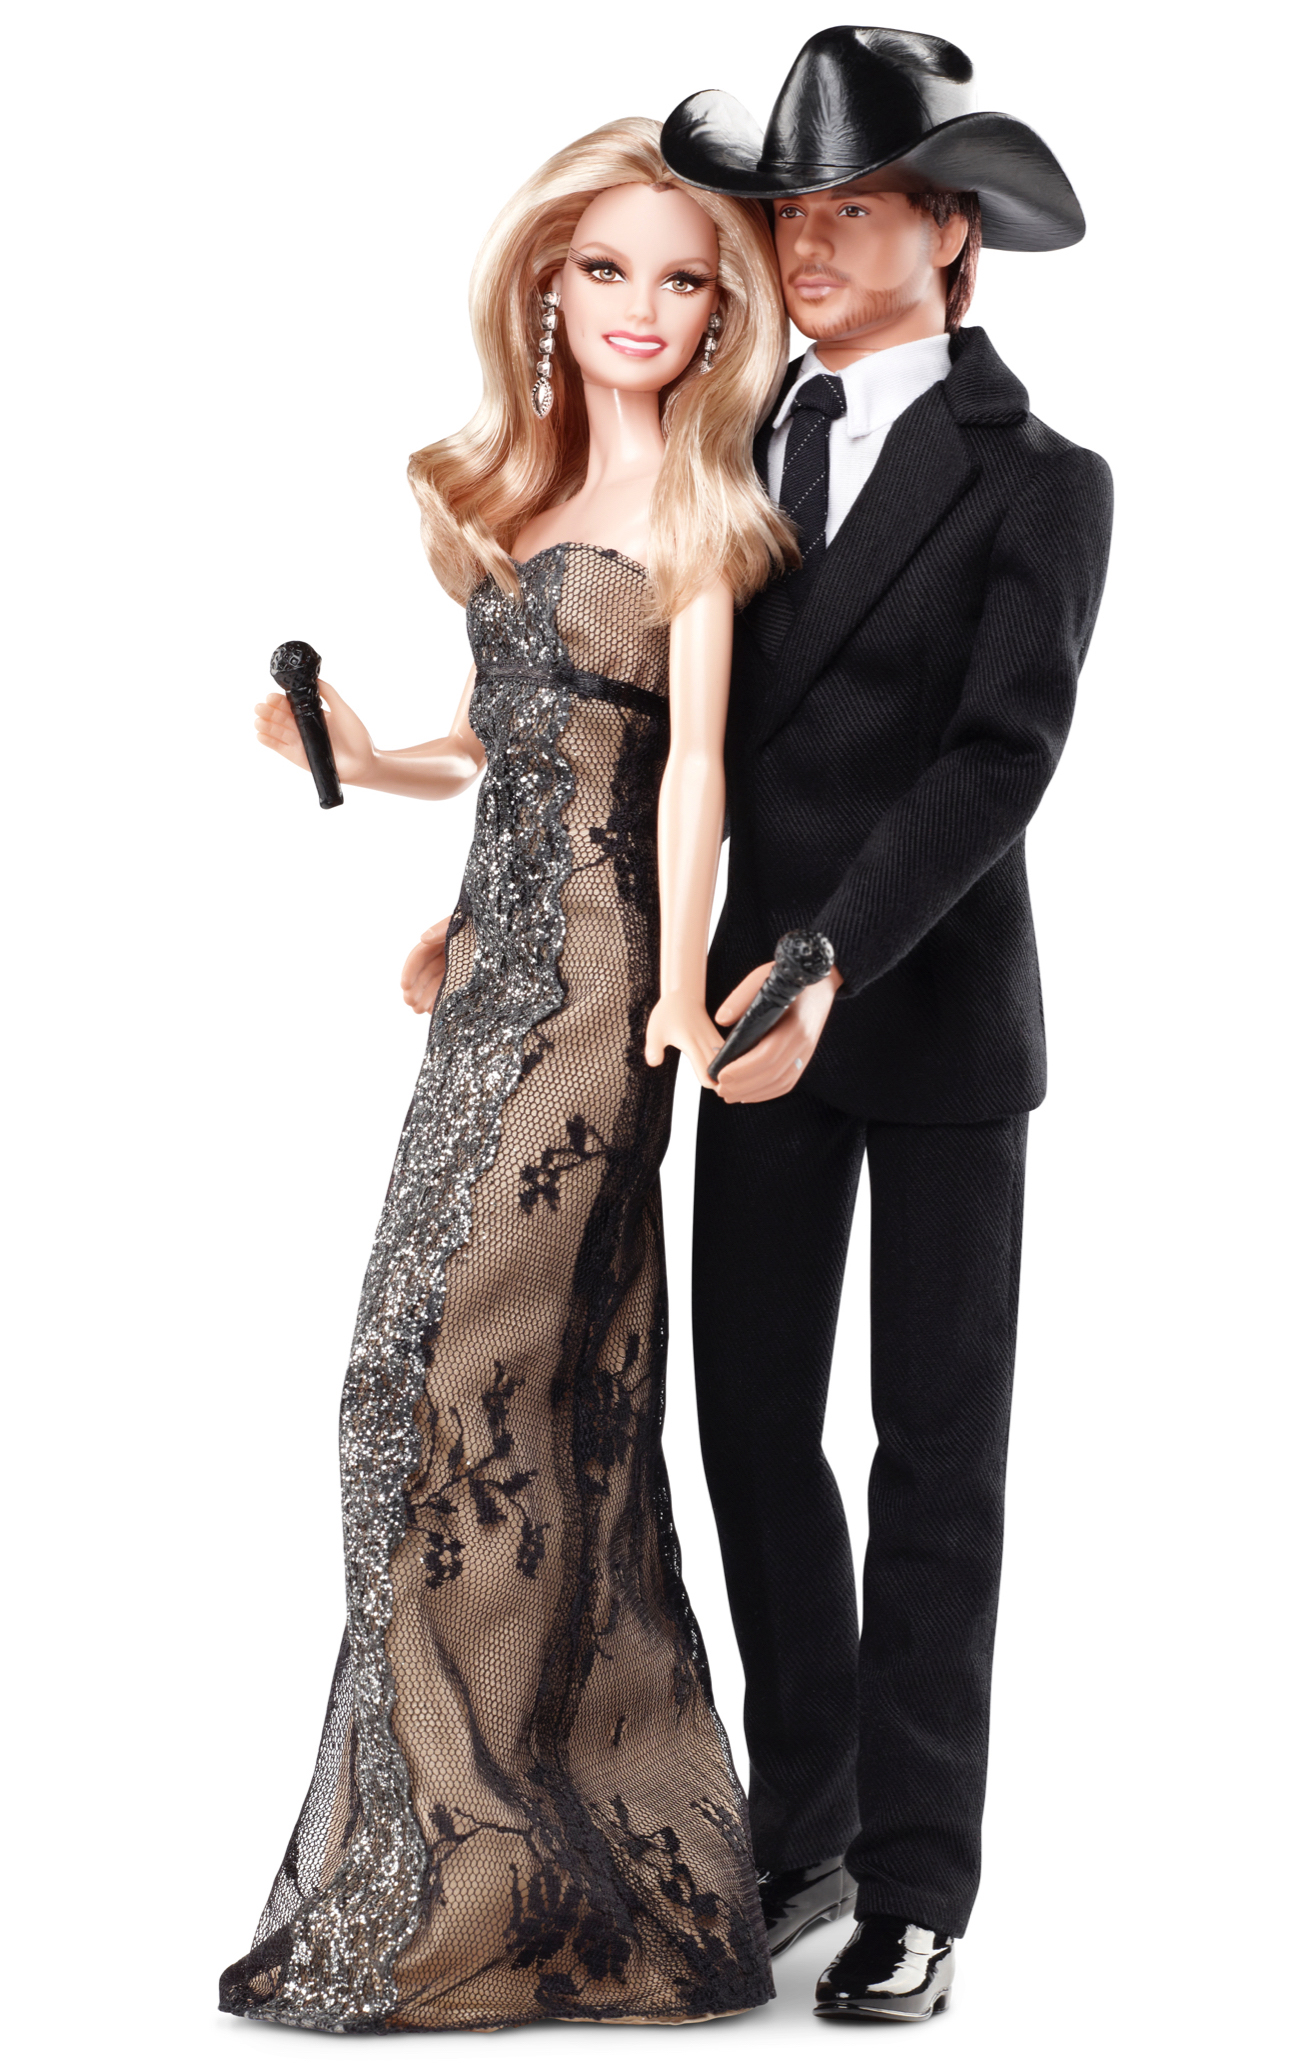 Faith Hill and Tim McGraw Dolls, released in 2011.